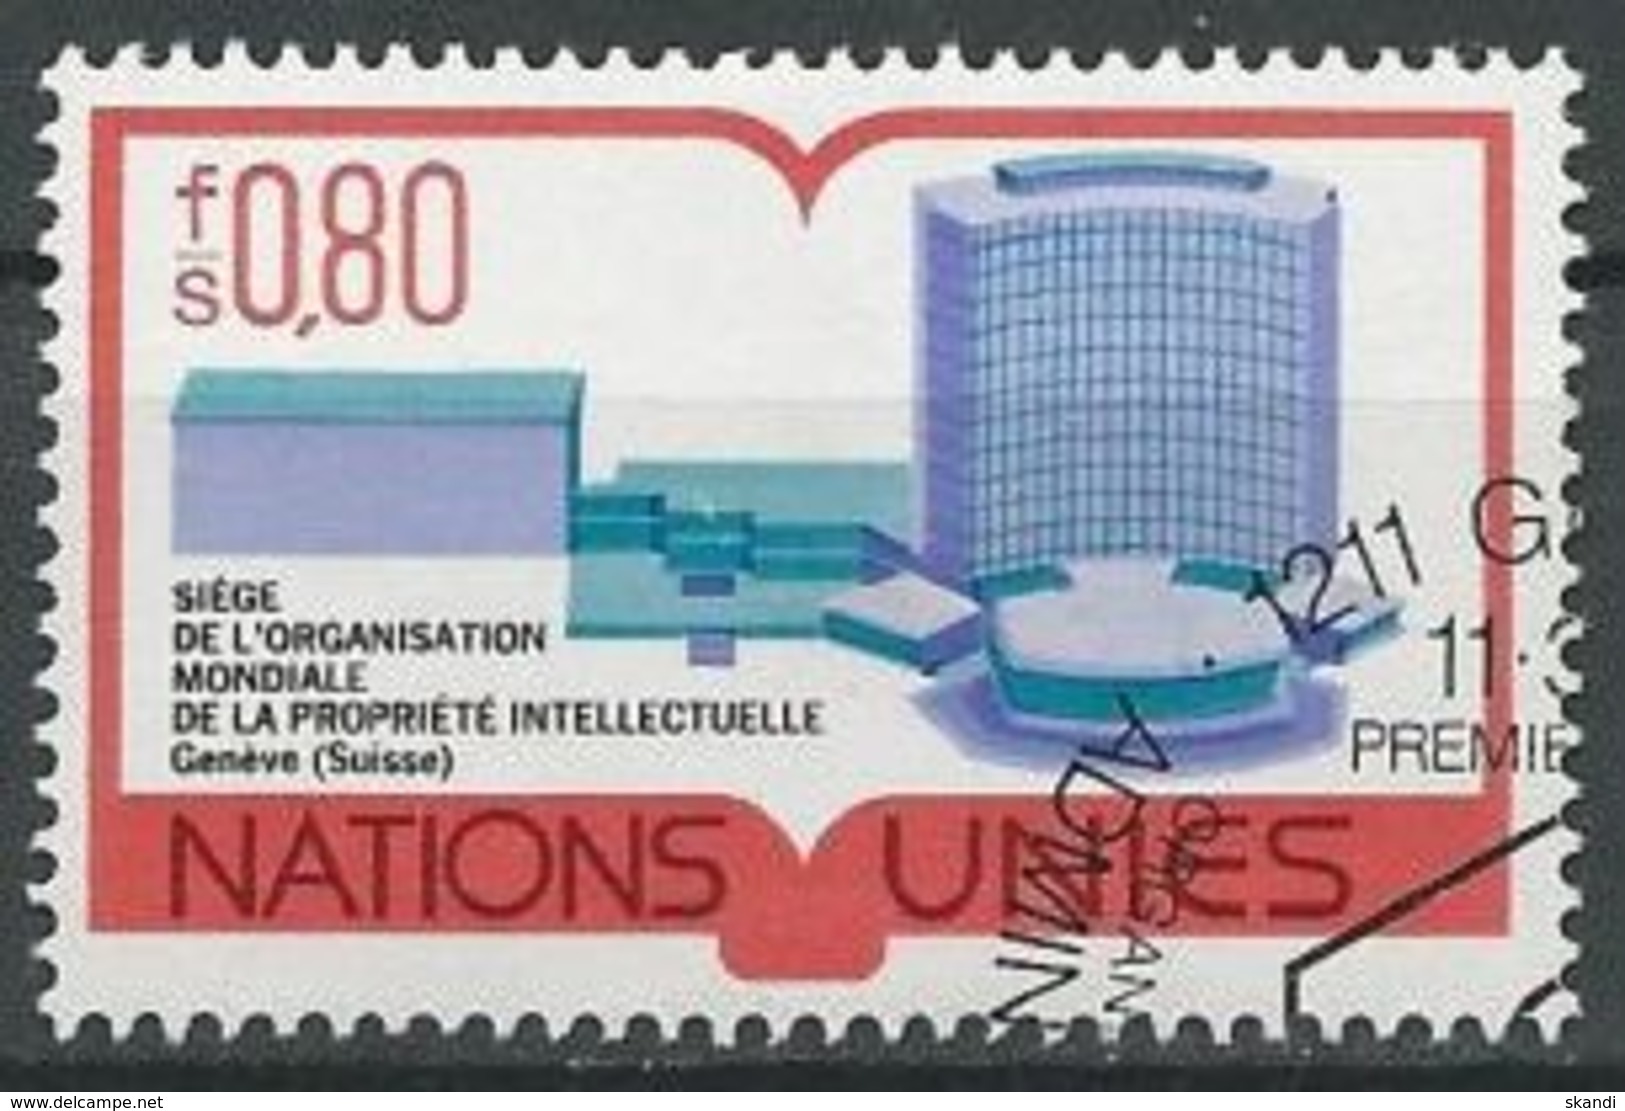 UNO GENF 1977 Mi-Nr. 63 O Used - Aus Abo - Used Stamps